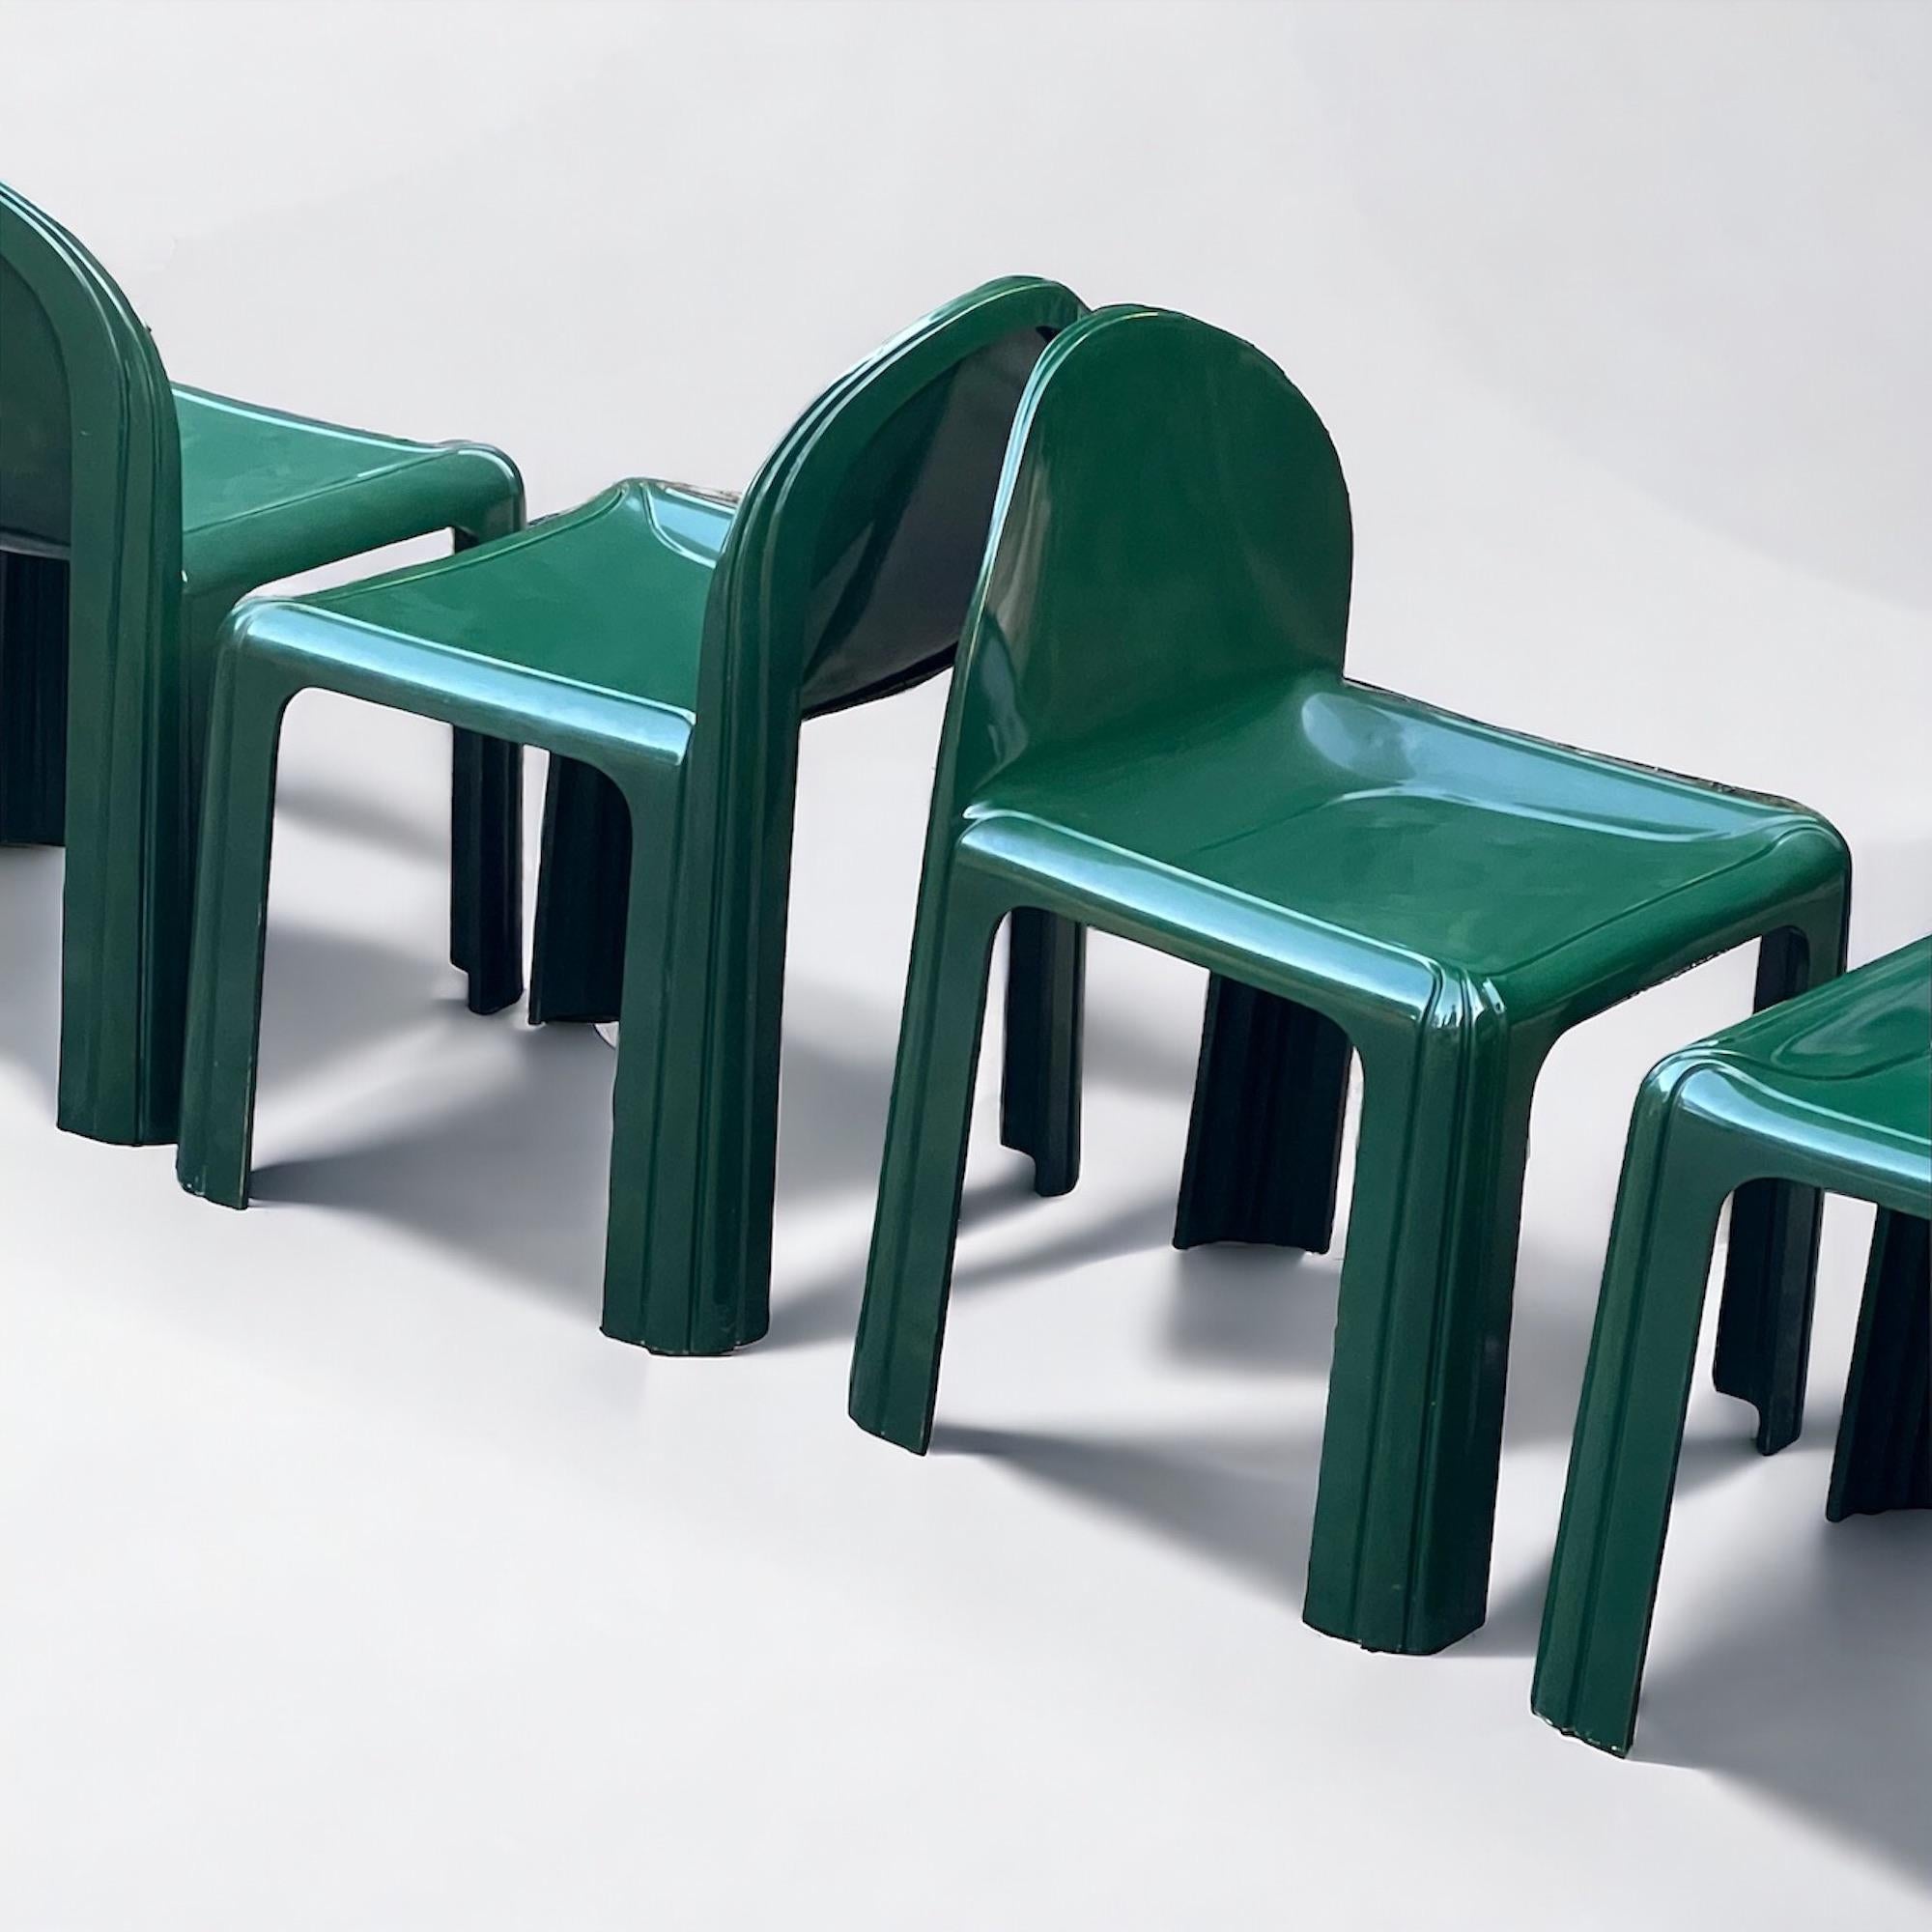 Italian Kartell Model 4854 Chairs by Gae Aulenti, 1960s - Set of 4 - Emerald Green Resin For Sale